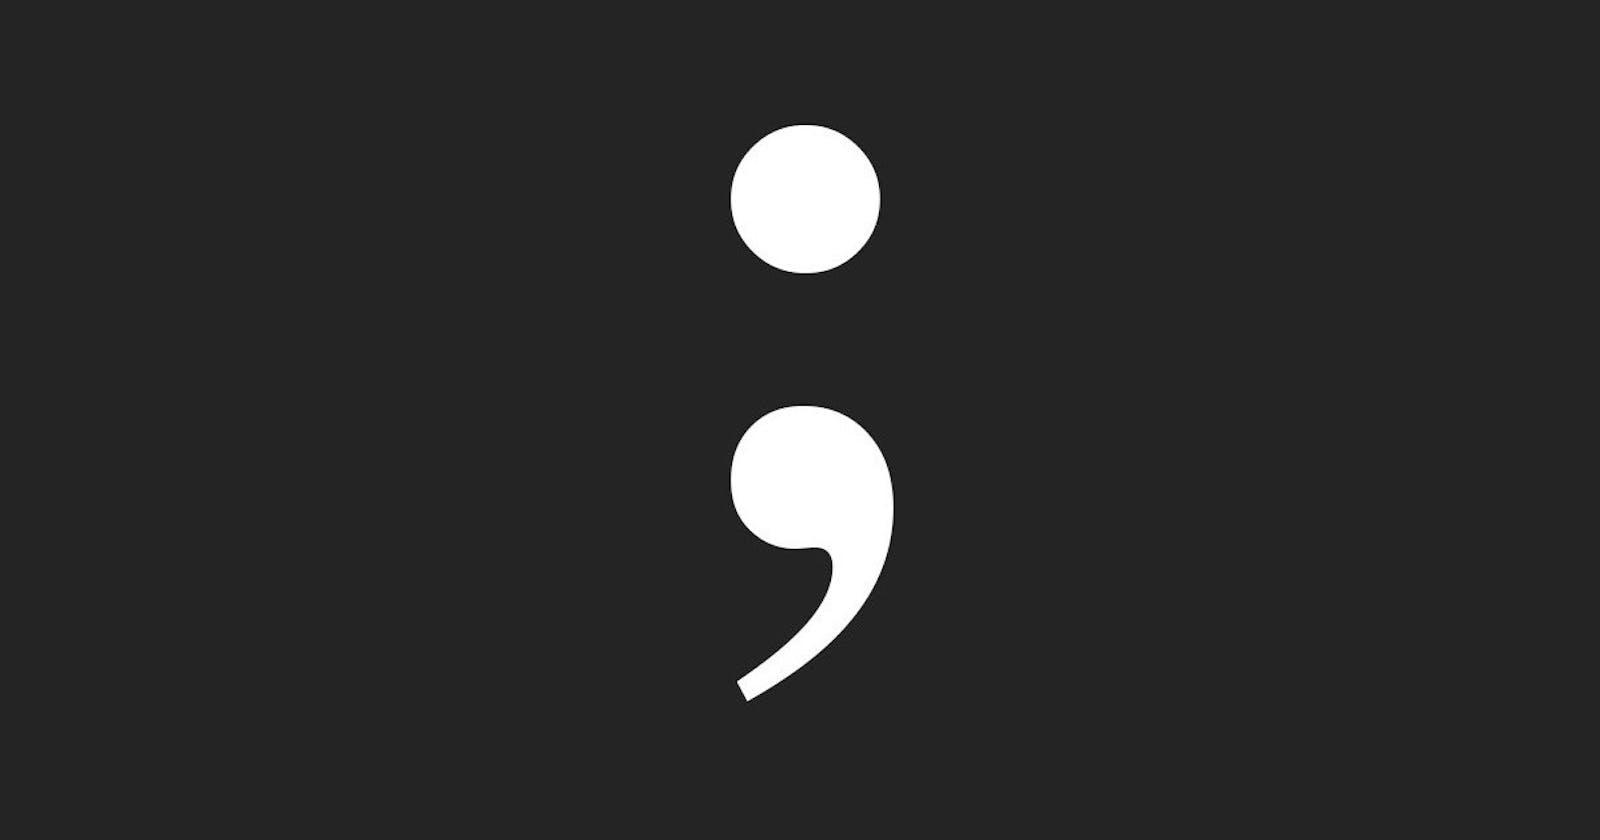 Using Semicolons? Never Use Them!